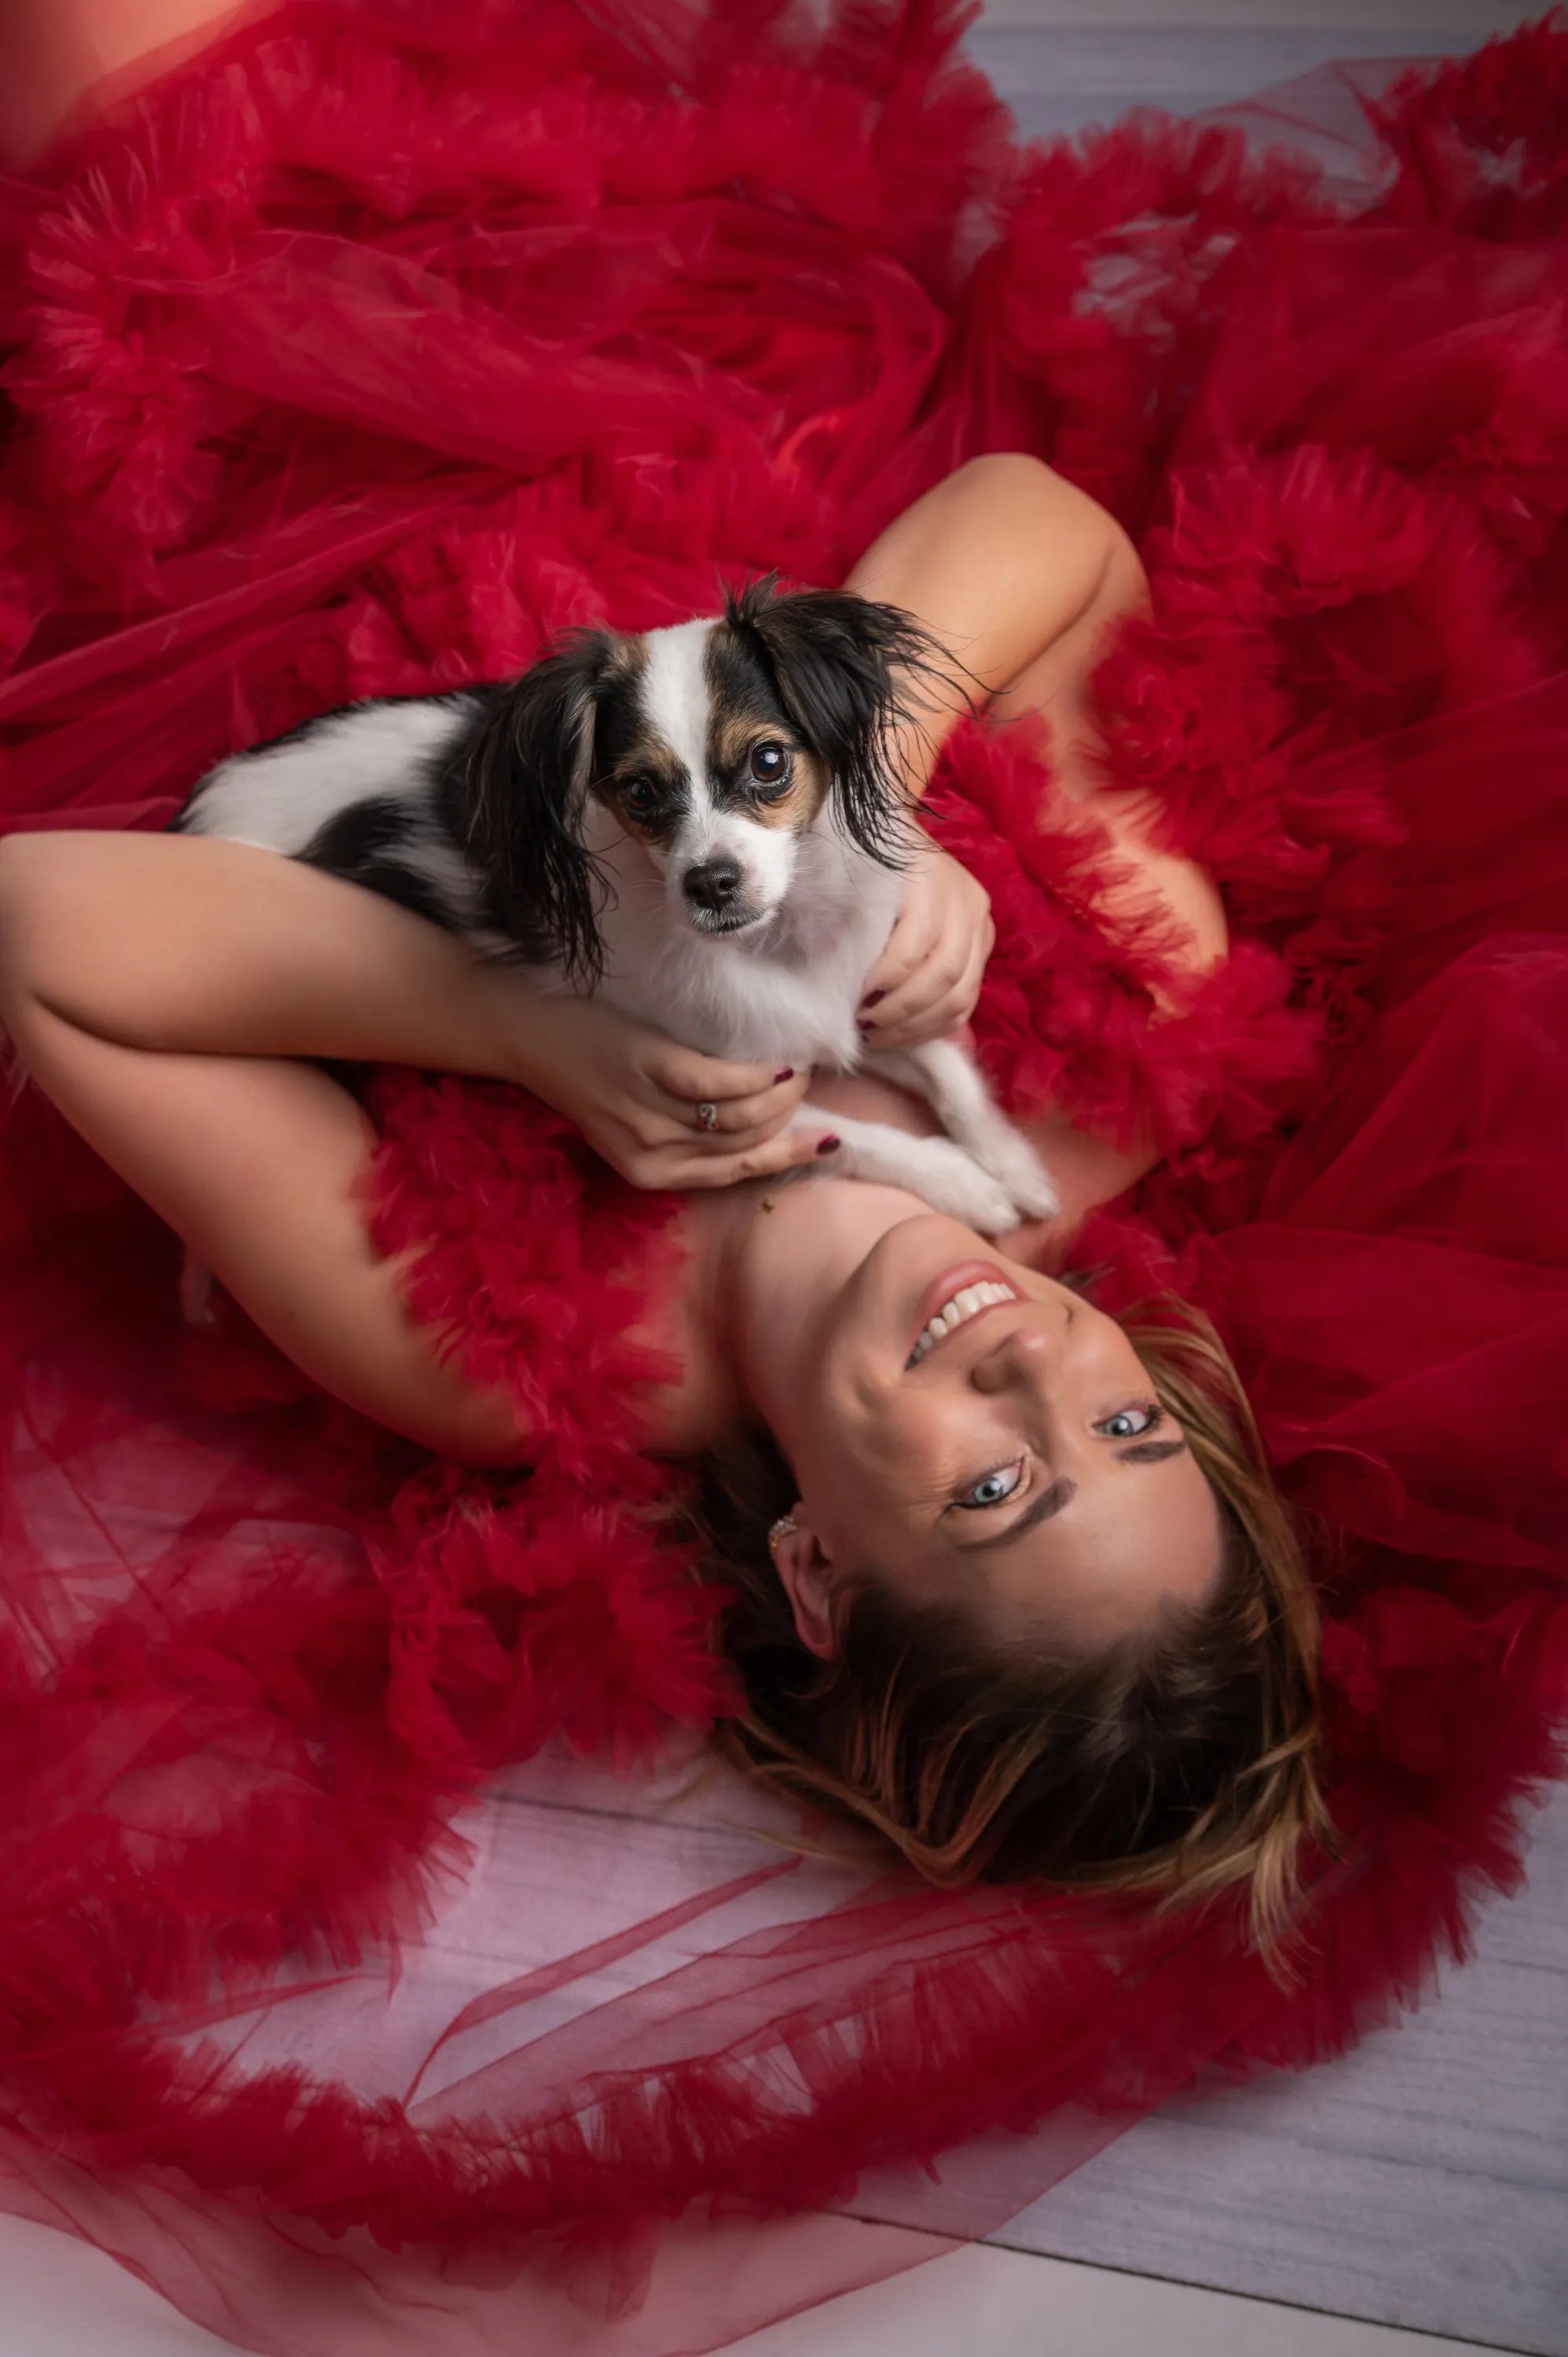 Woman in red dress with small dog